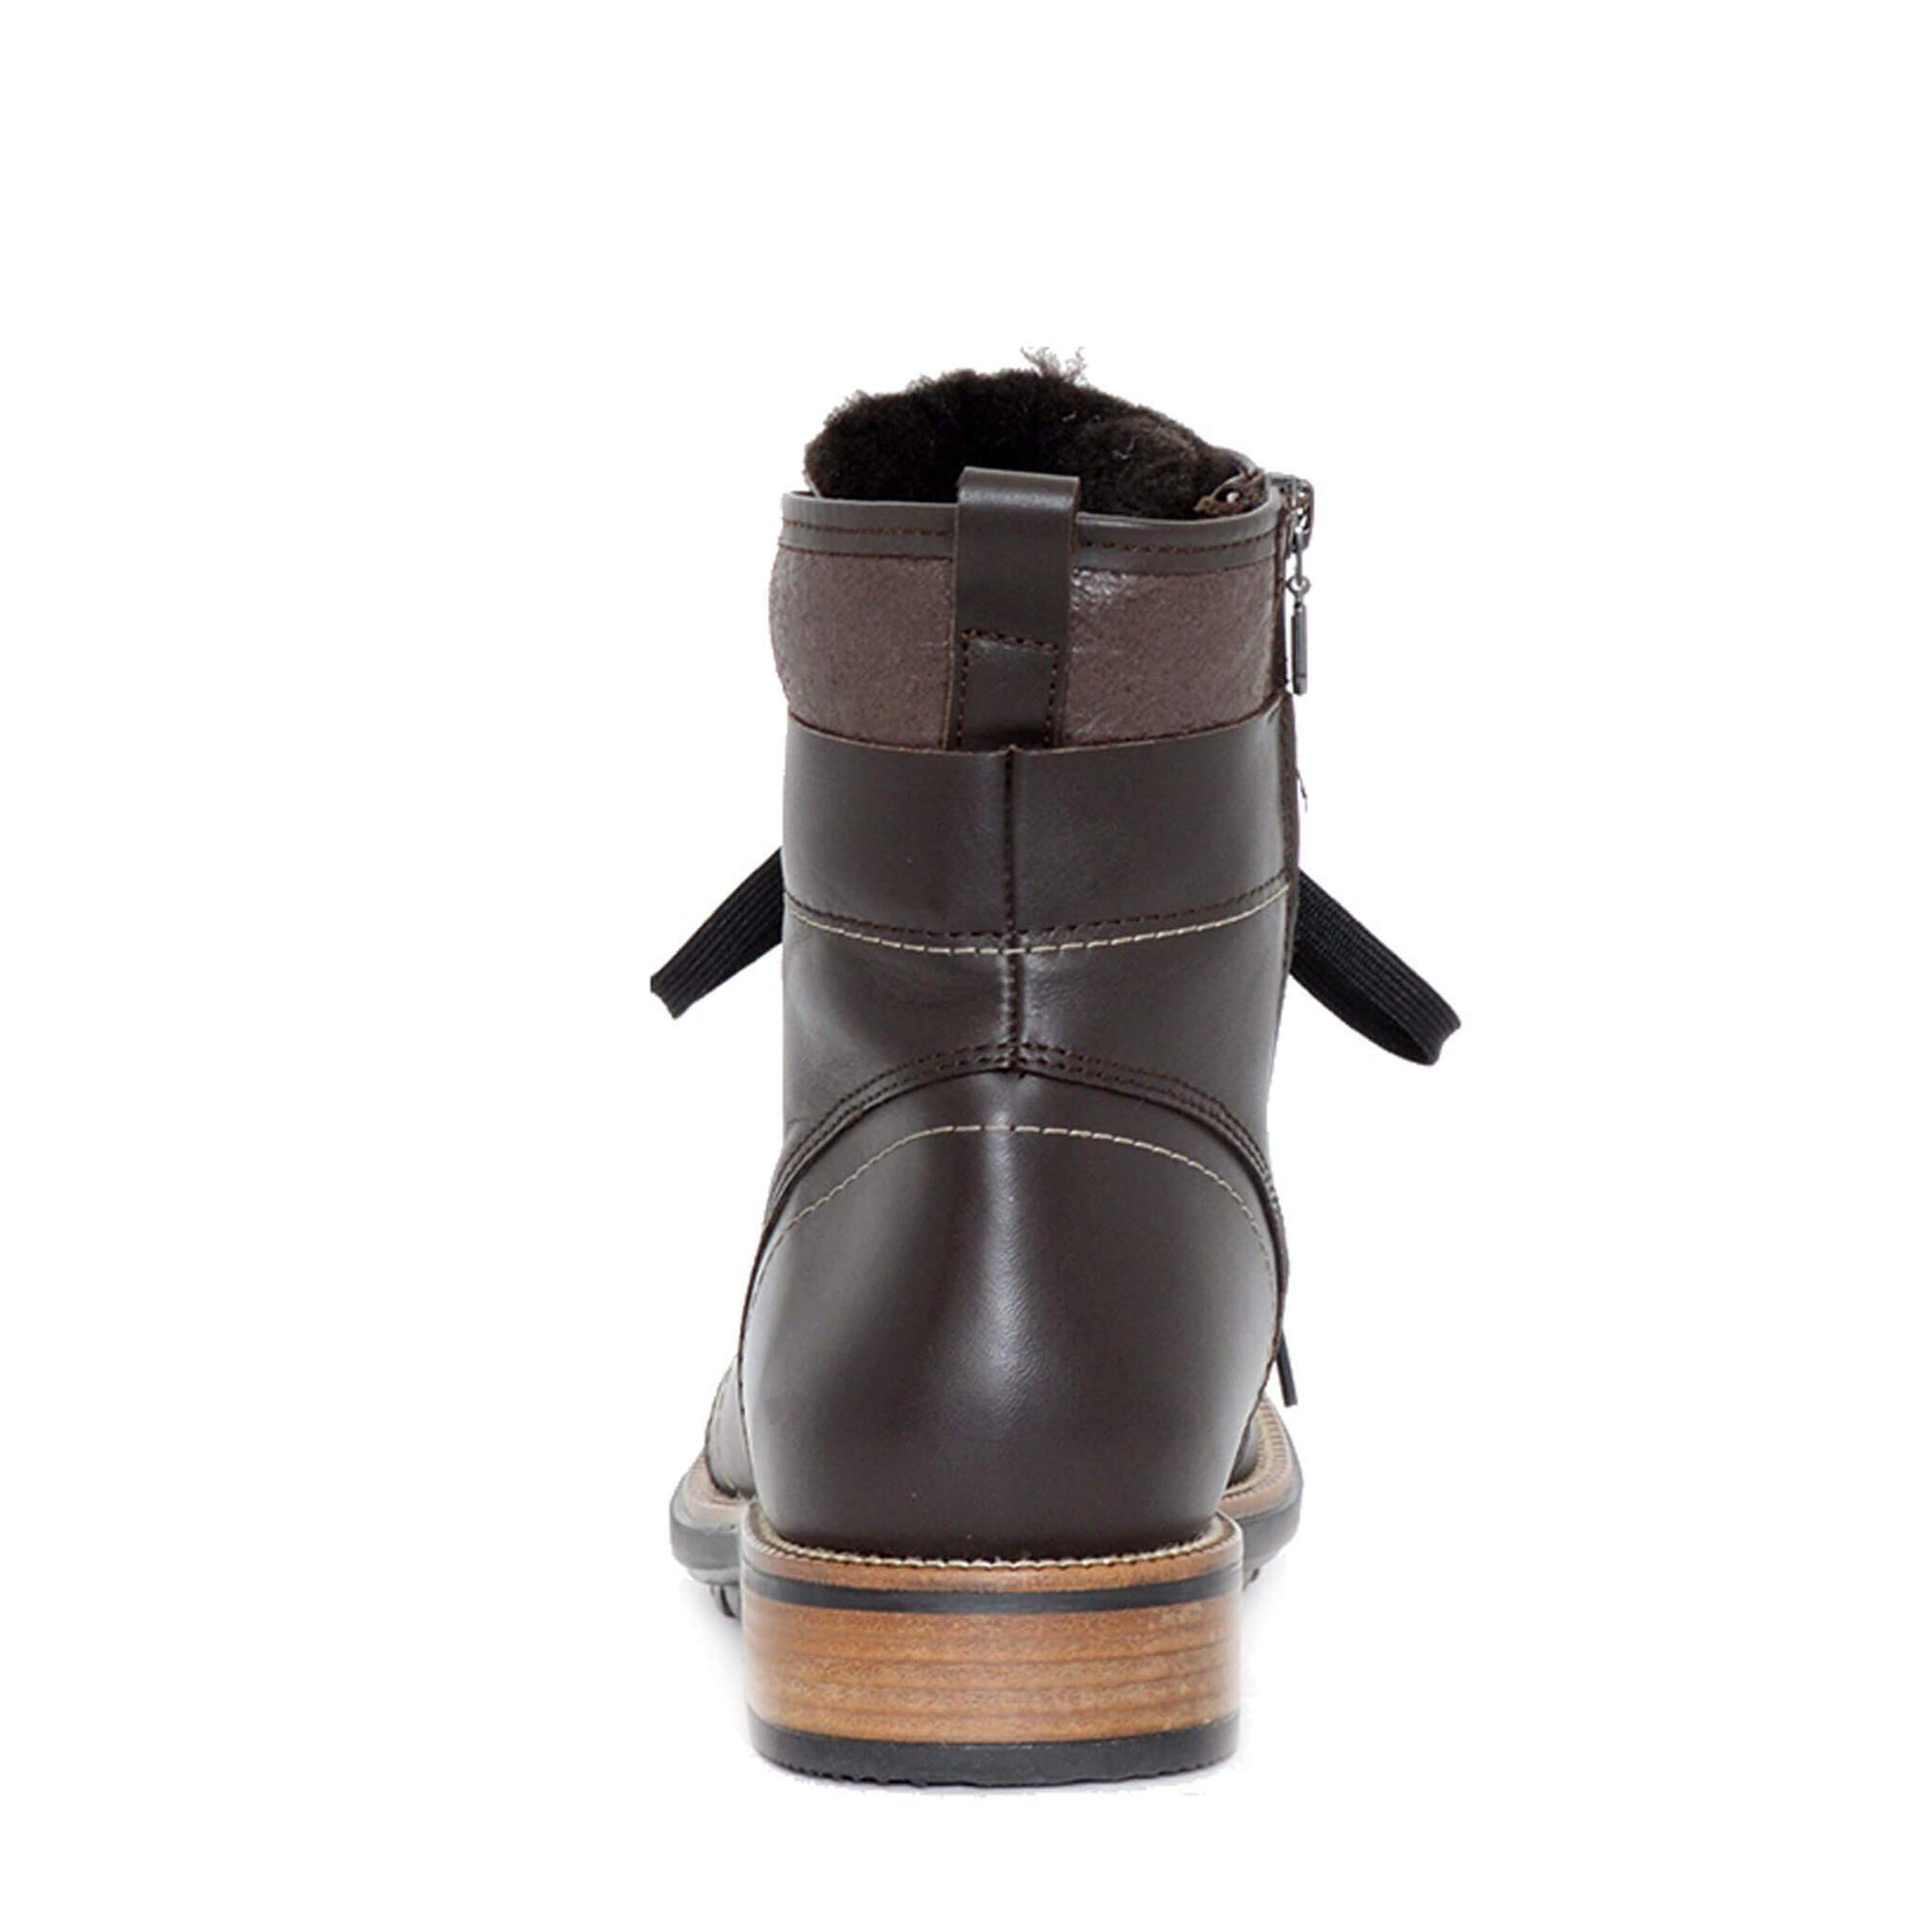 Malcolm winter boot for men - Brown